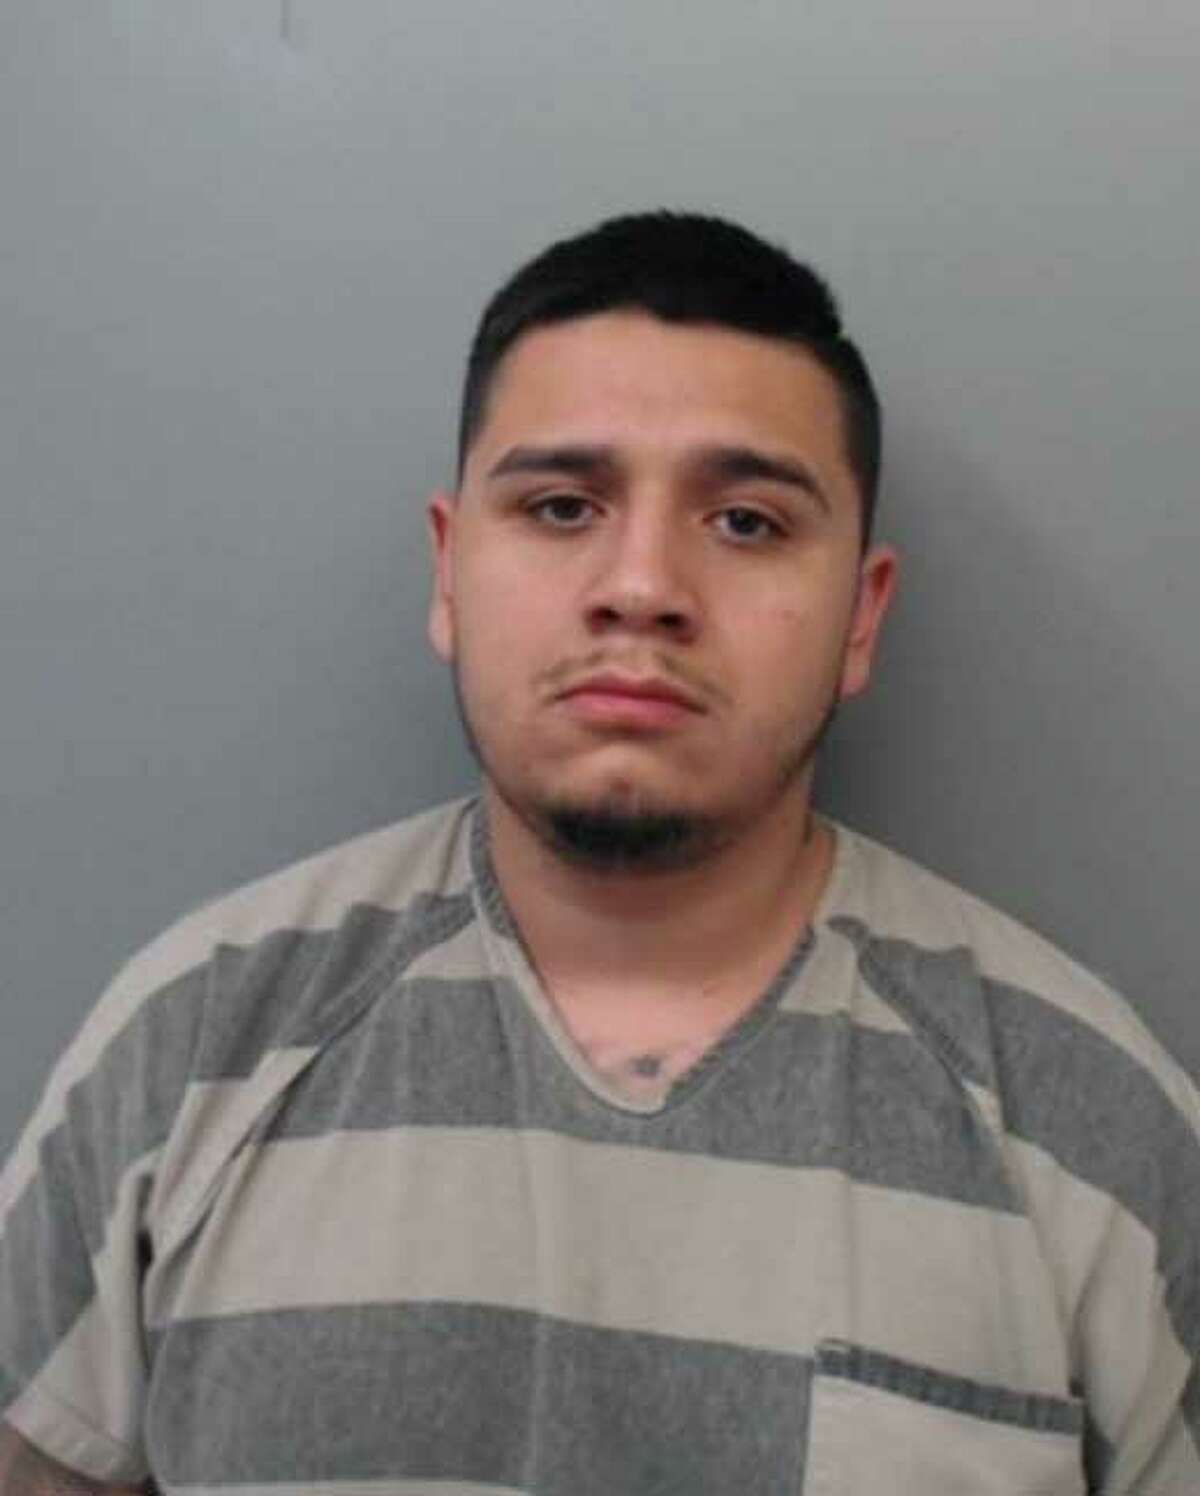 Justino Vera Jr., 26, was charged with criminal trespass, injury to a child and assault, family violence.